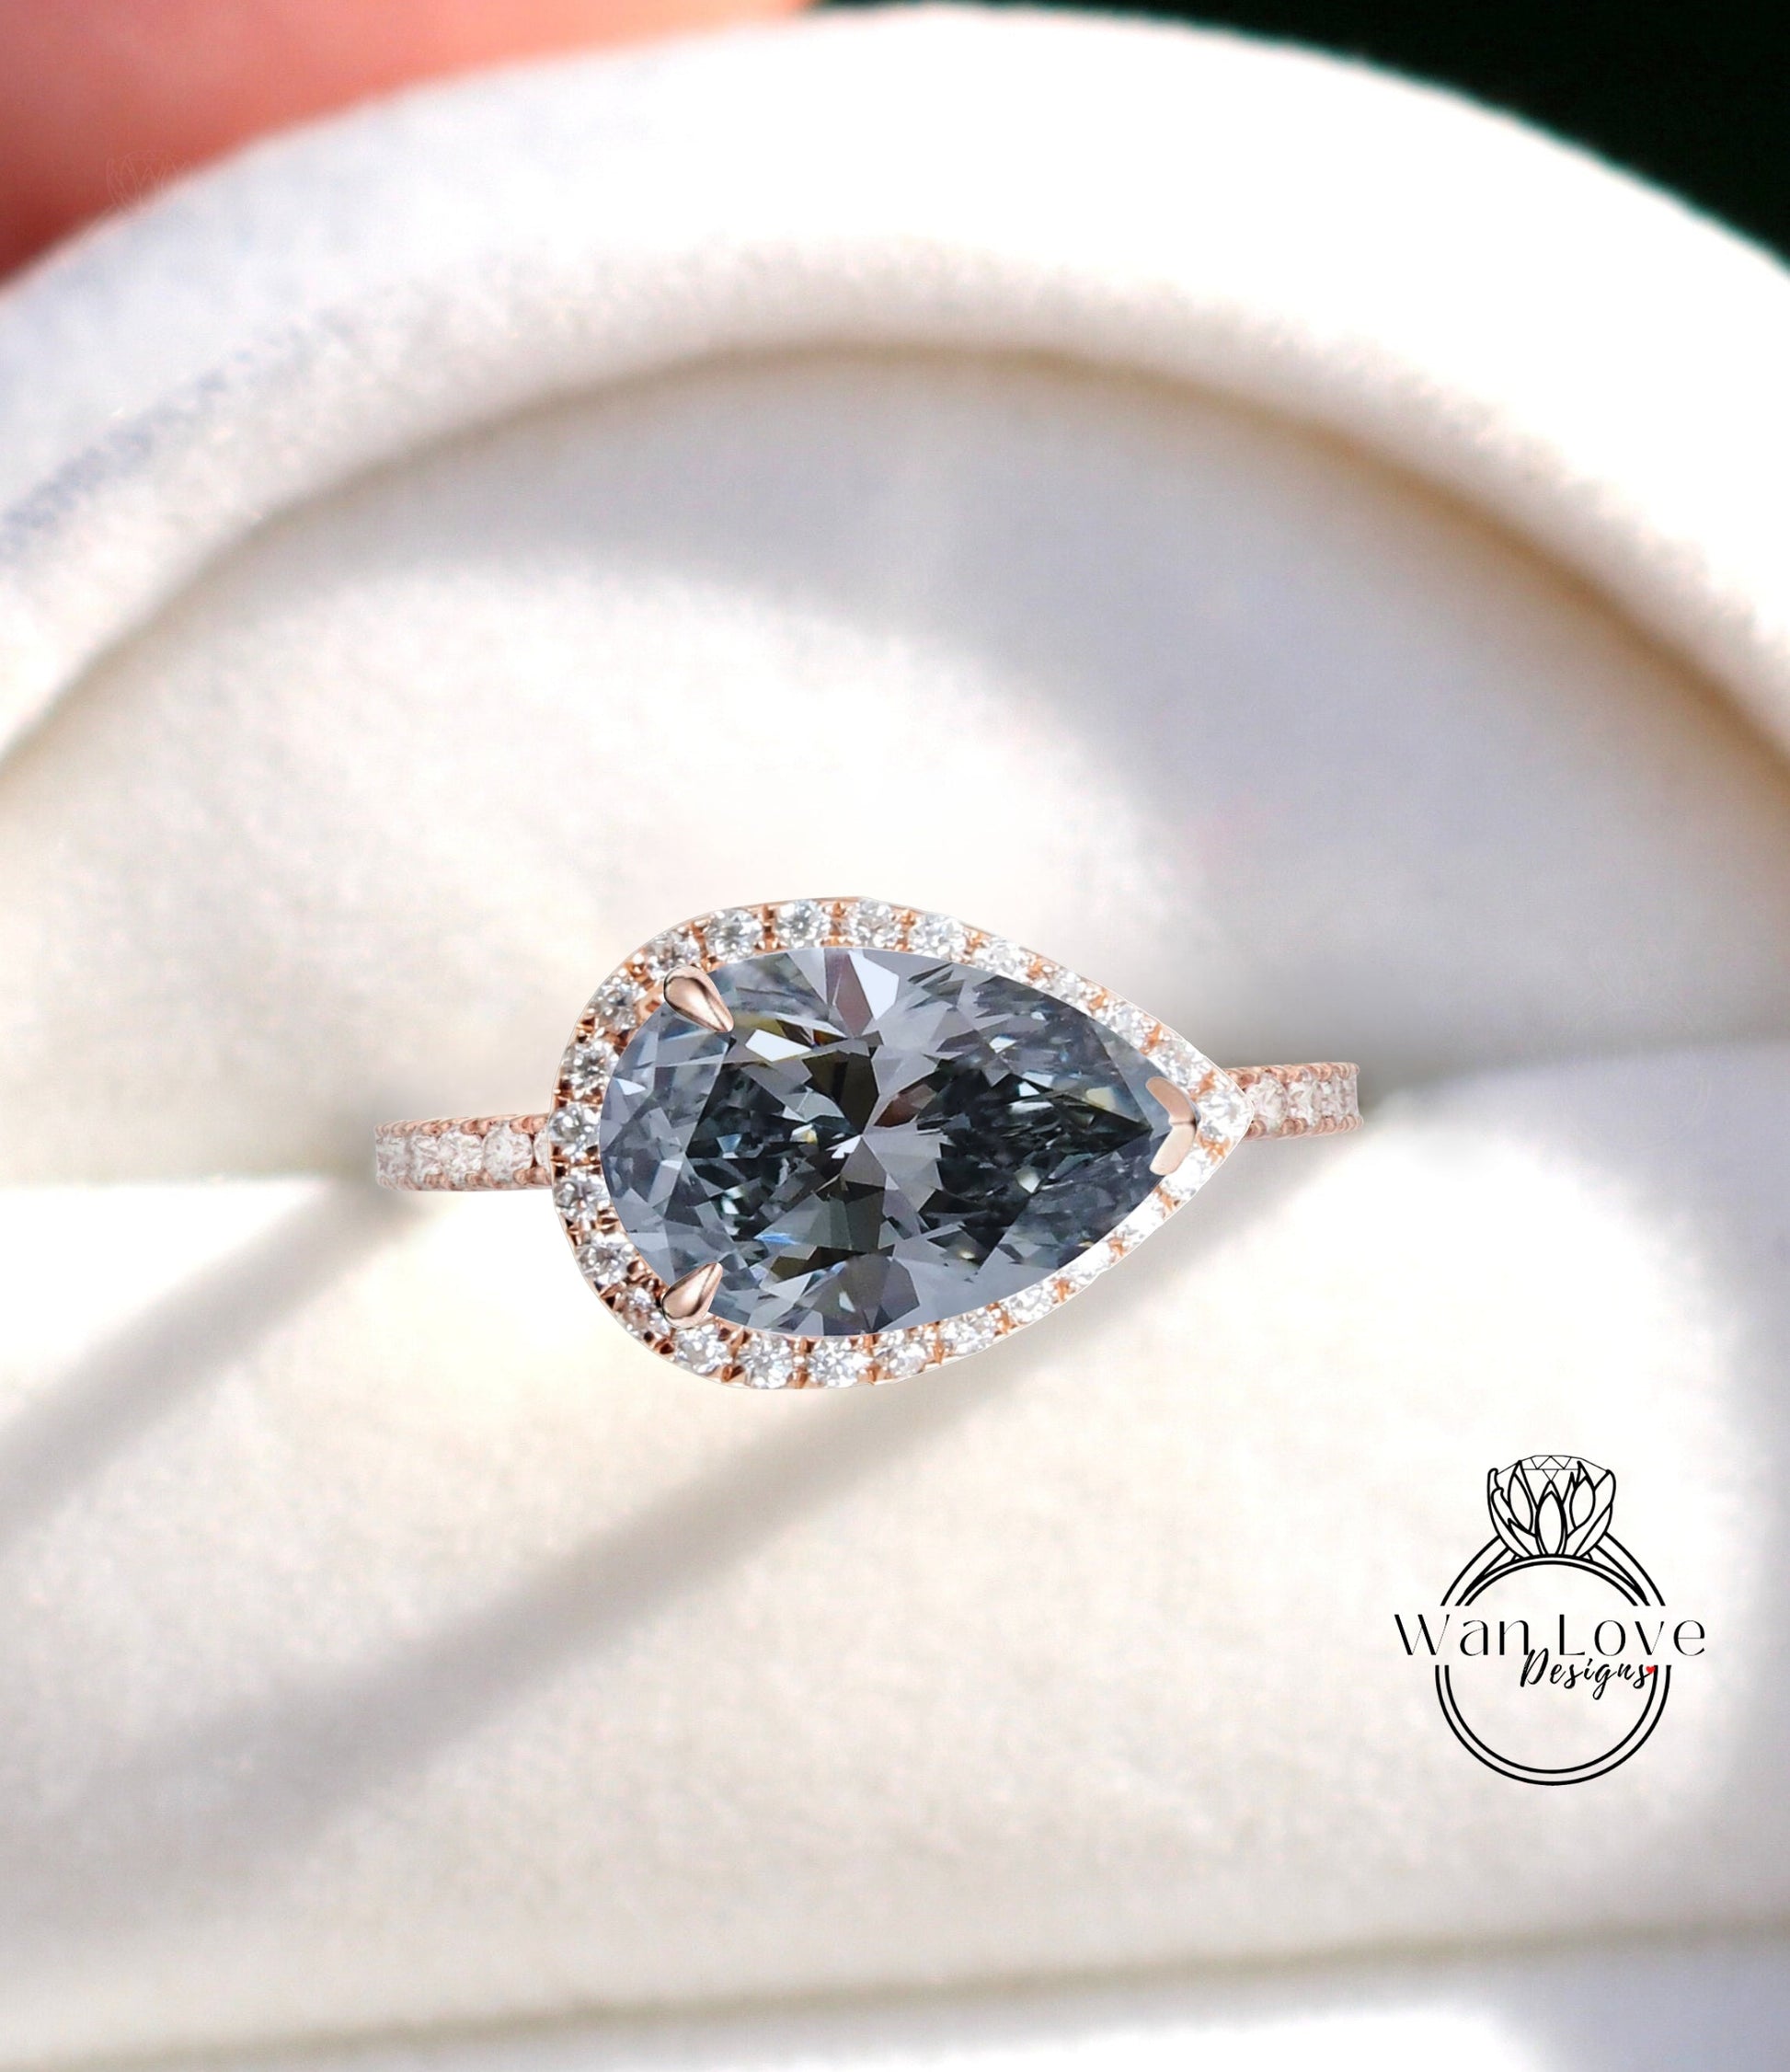 East West Pear Halo Engagement Ring, Antique Gray Moissanite engagement ring, diamond halo pear cut ring, vintage halo Ring, Unique Halo Ring Wan Love Designs